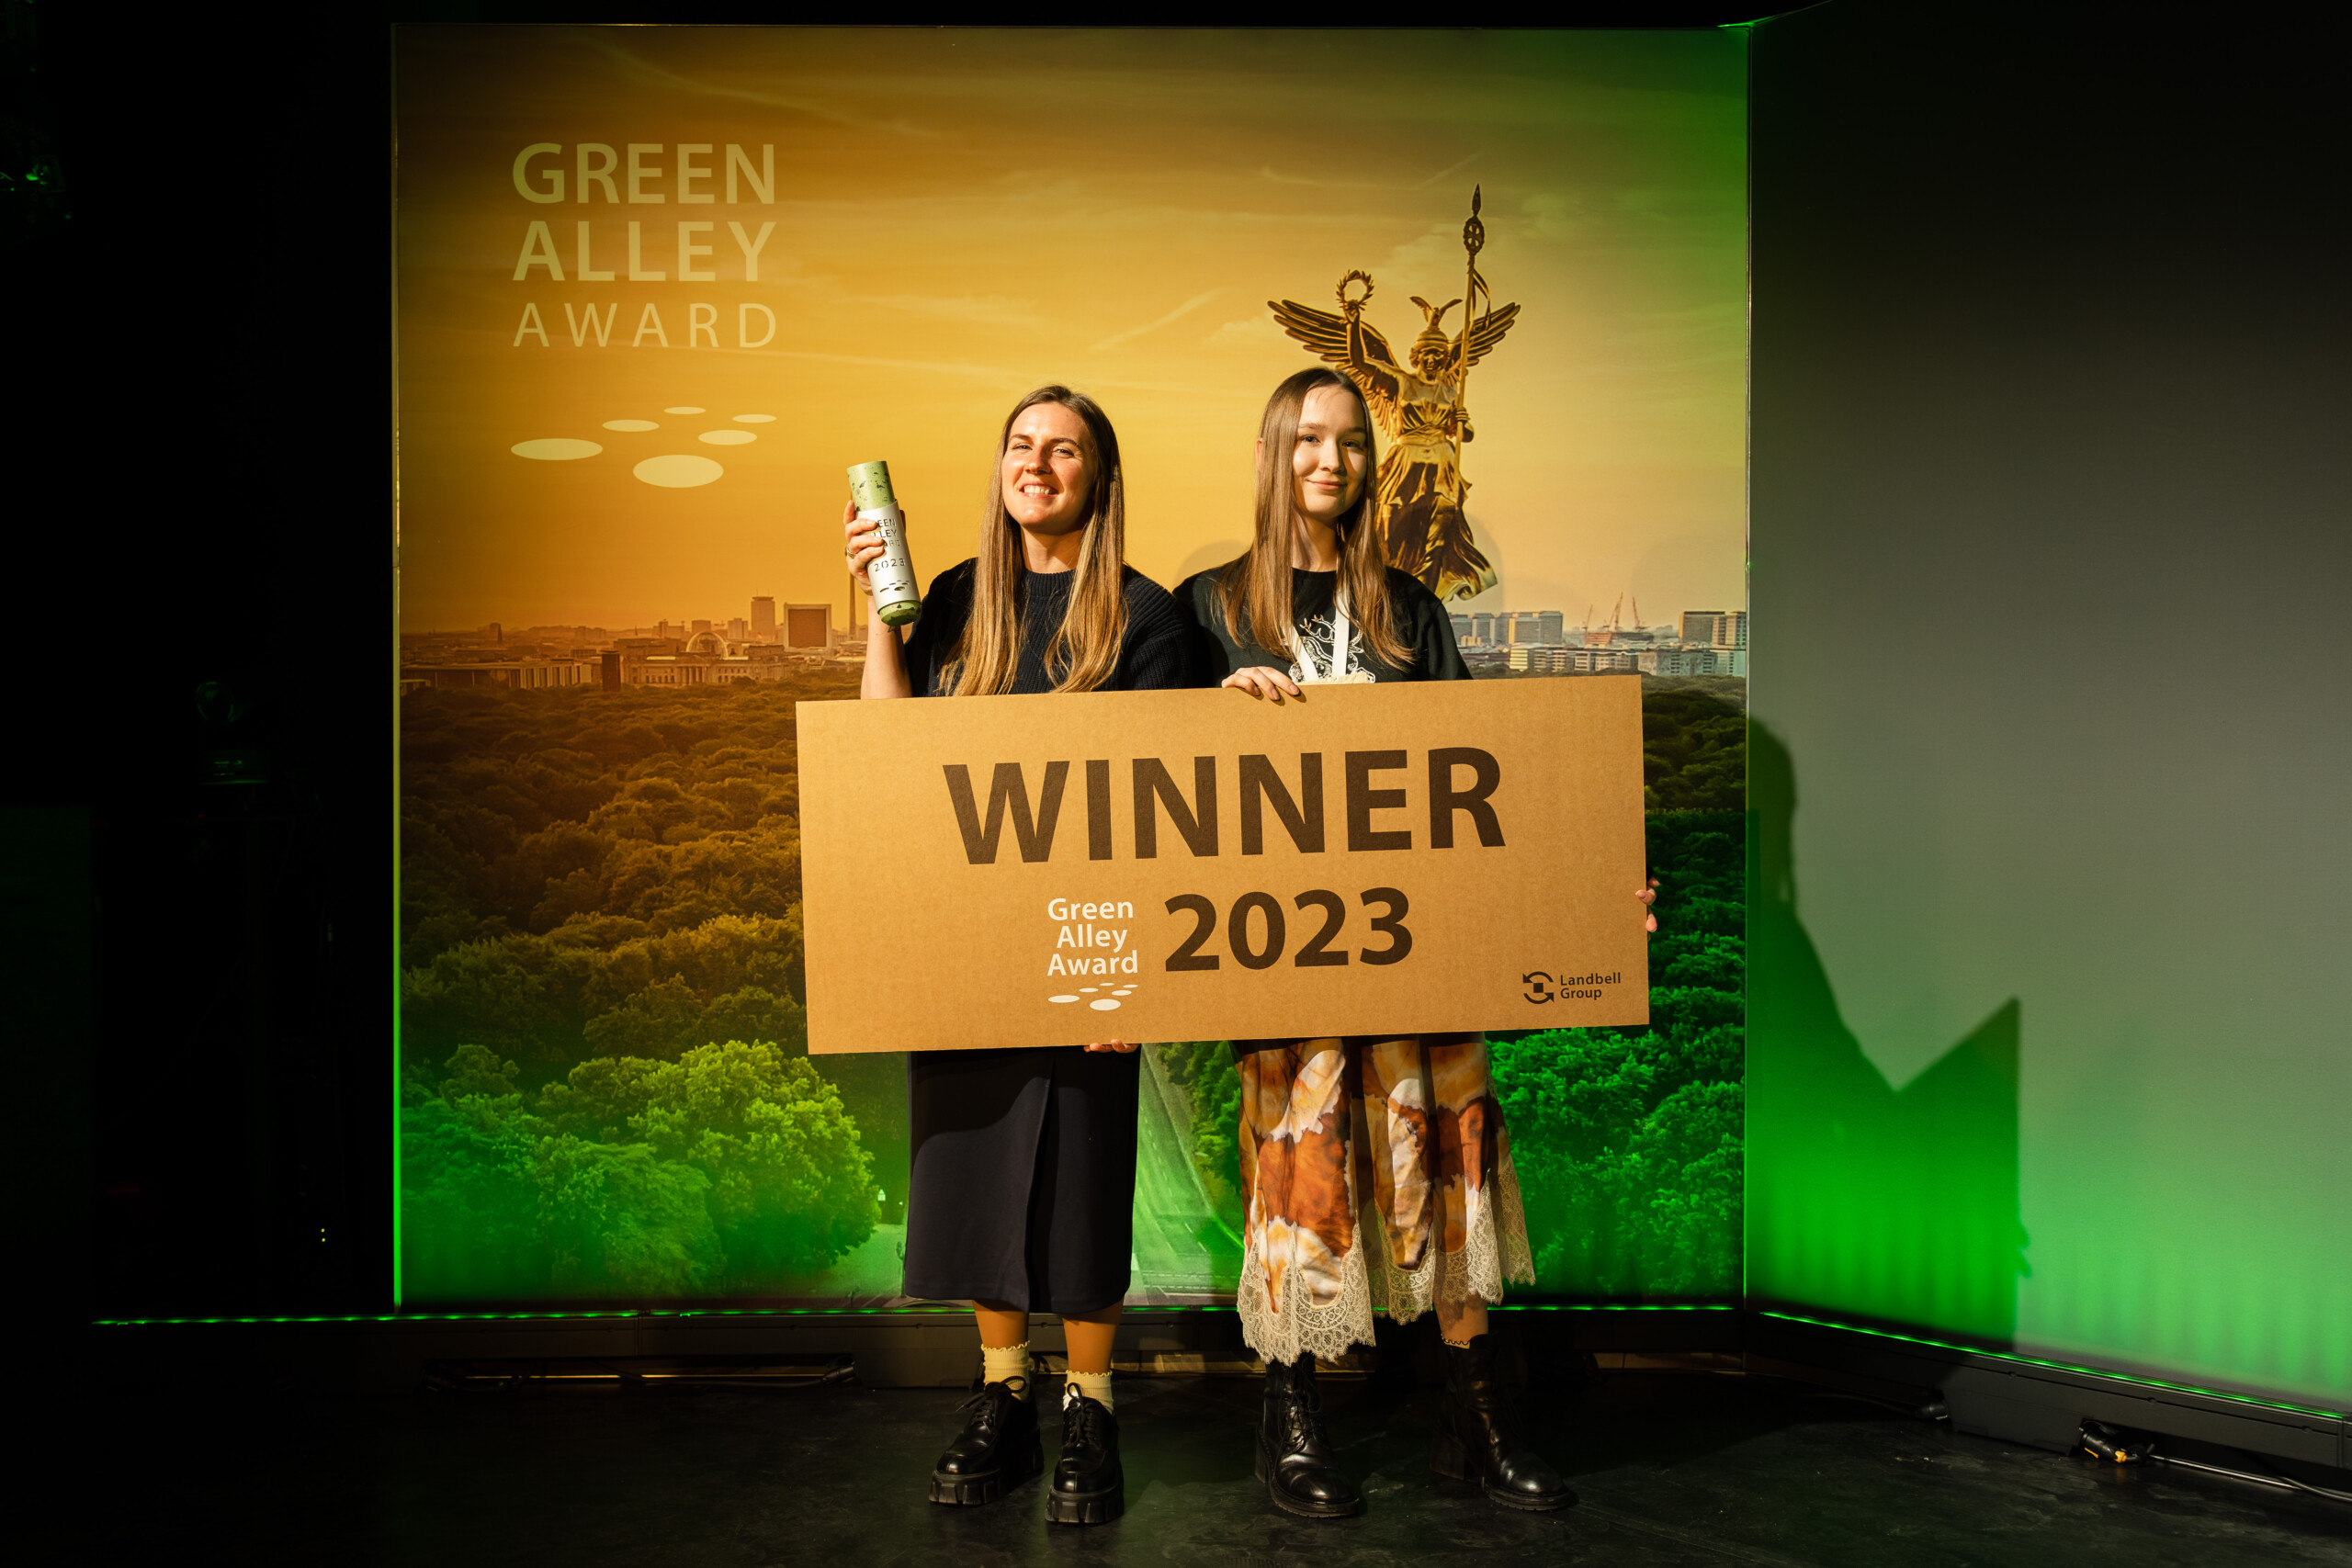 S.Lab, winner of the Green Alley Award 2023